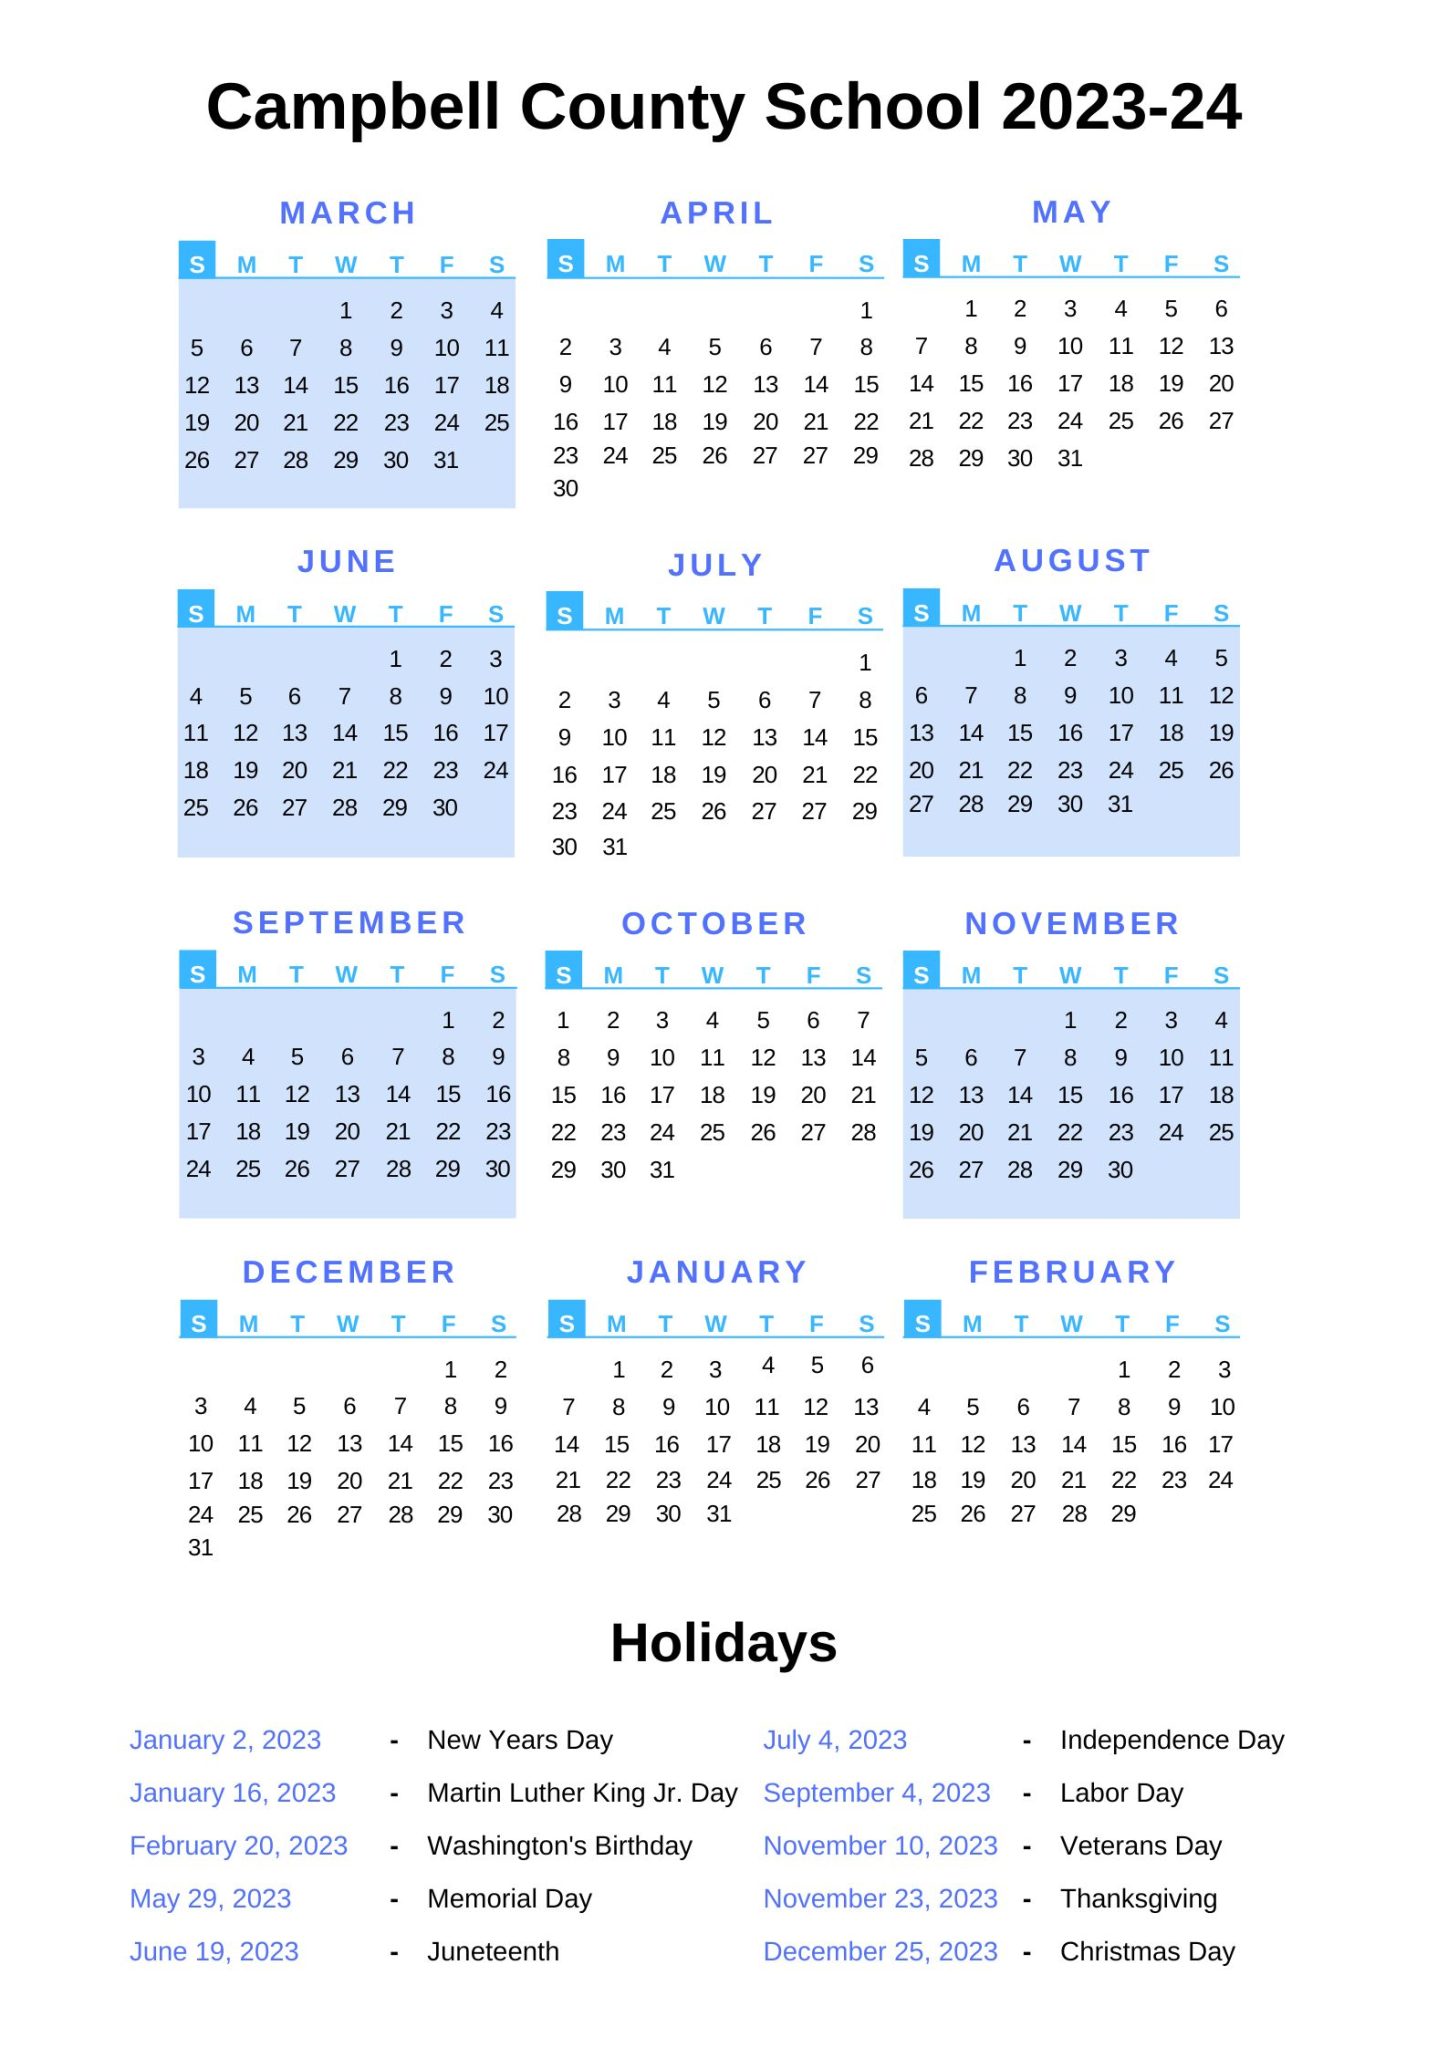 Campbell County Schools Calendar 202324 with Holidays